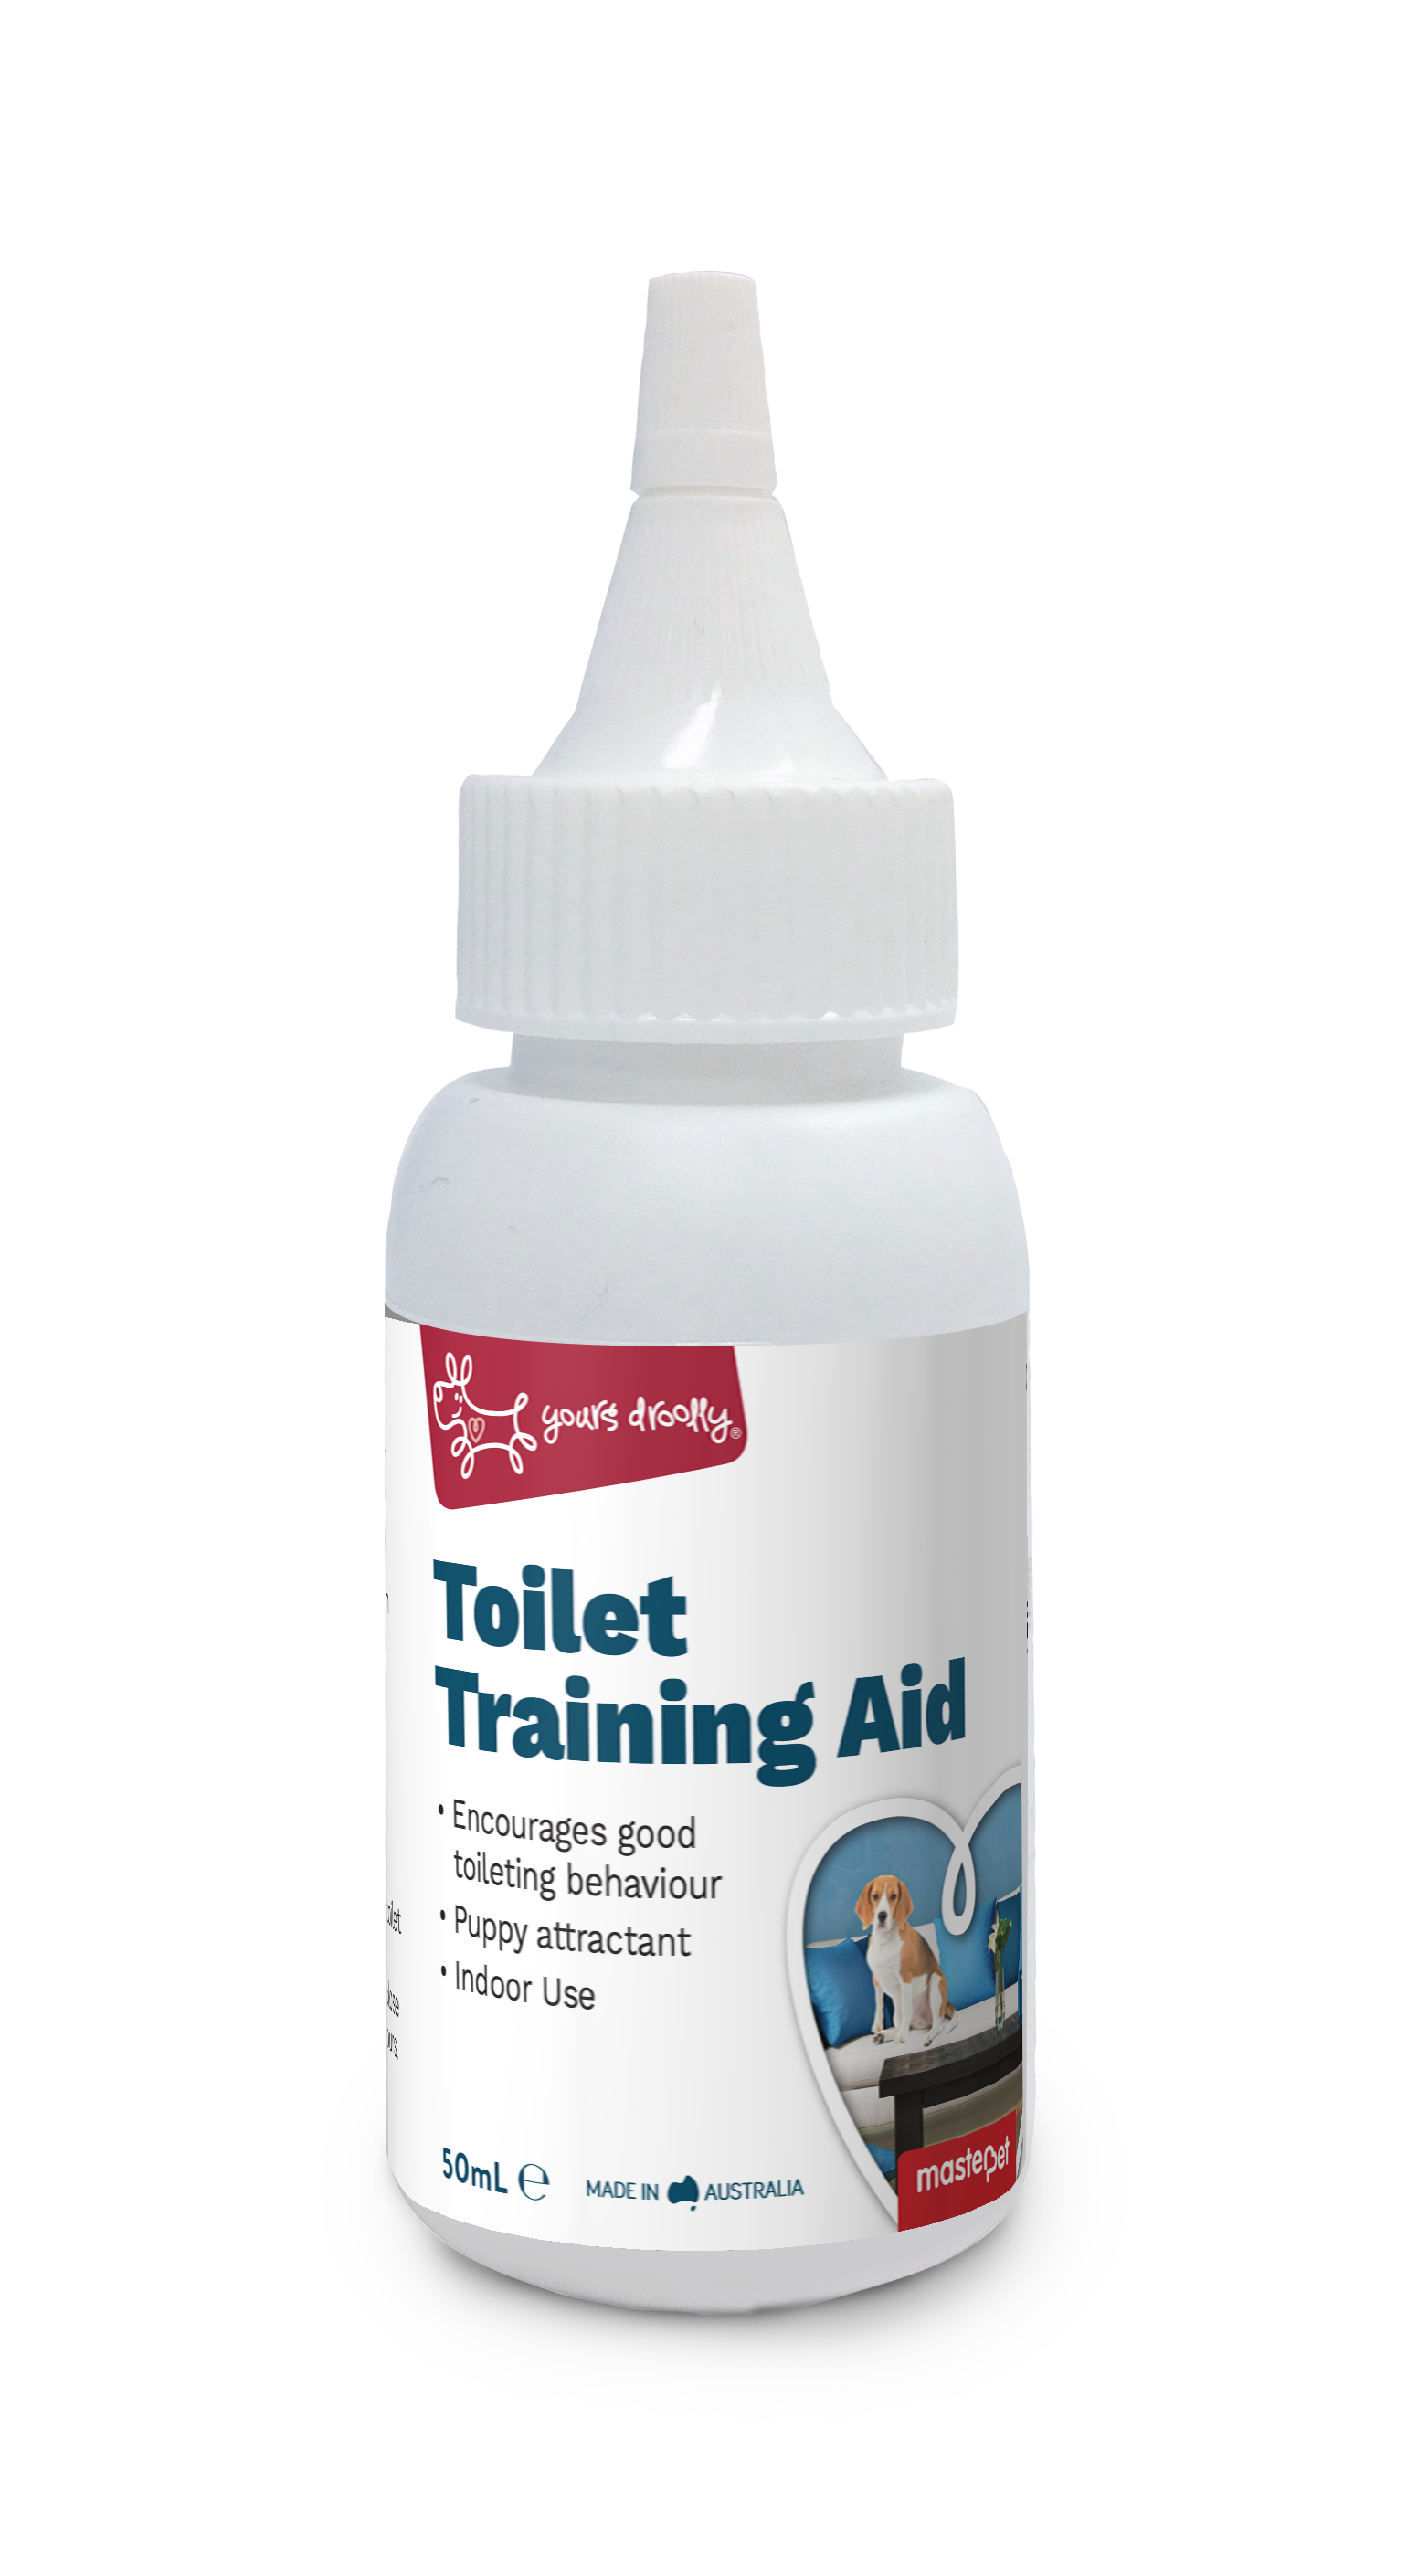 Yours Droolly Toilet Training Aid 50ml - RSPCA VIC